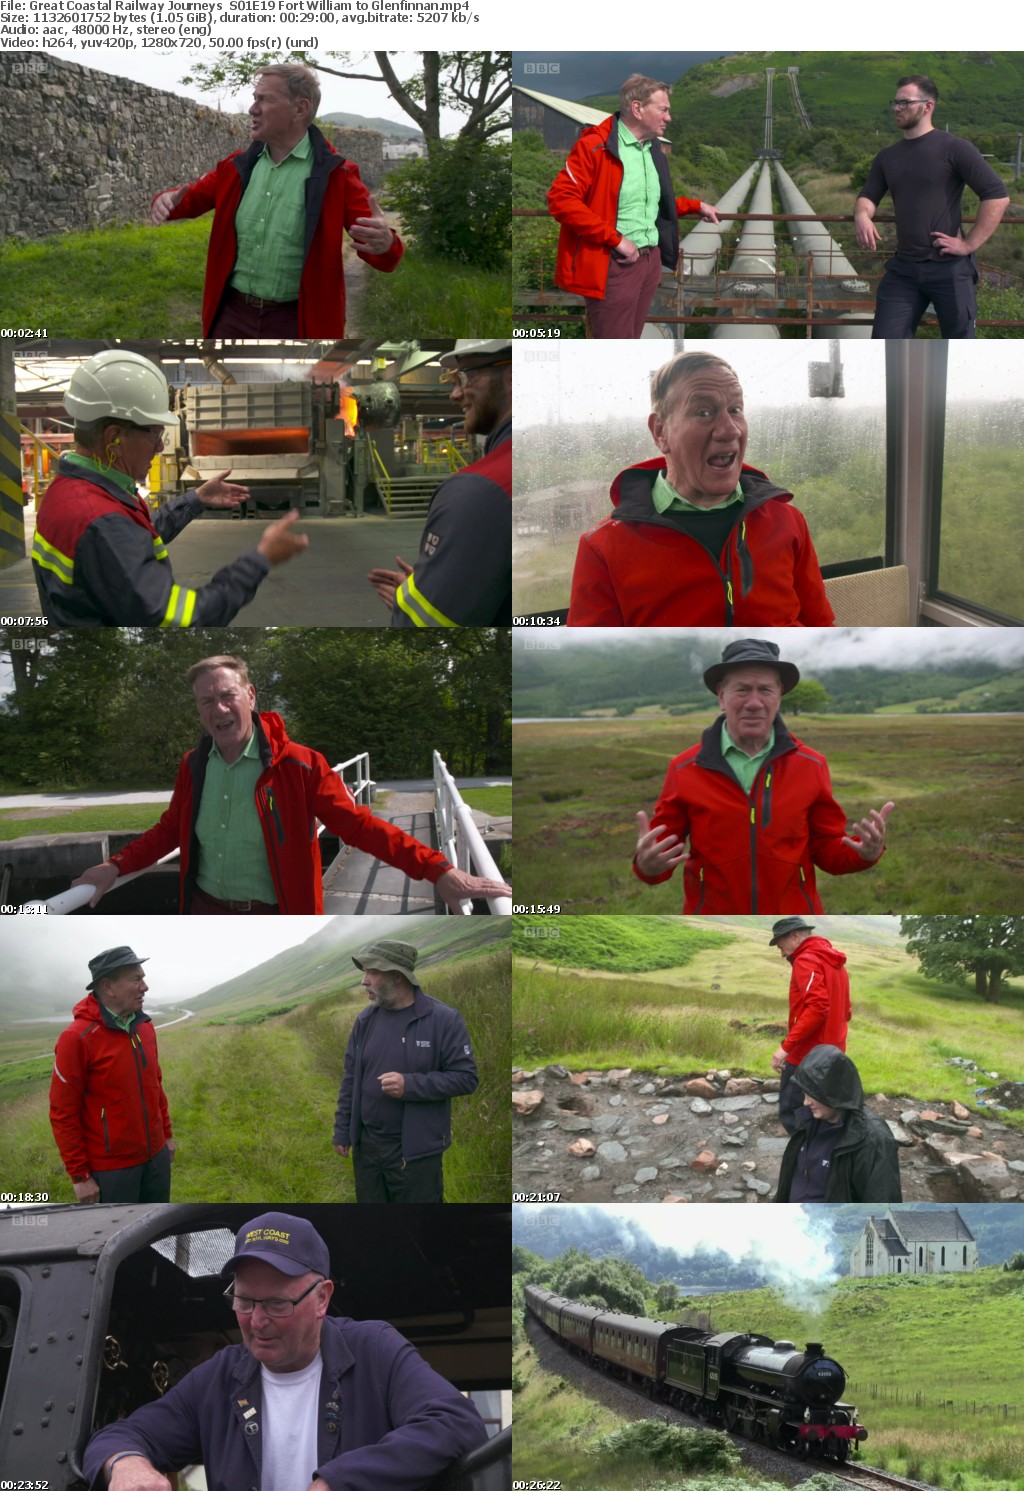 Great Coastal Railway Journeys S01E19 Fort William to Glenfinnan (1280x720p HD, 50fps, soft Eng subs)